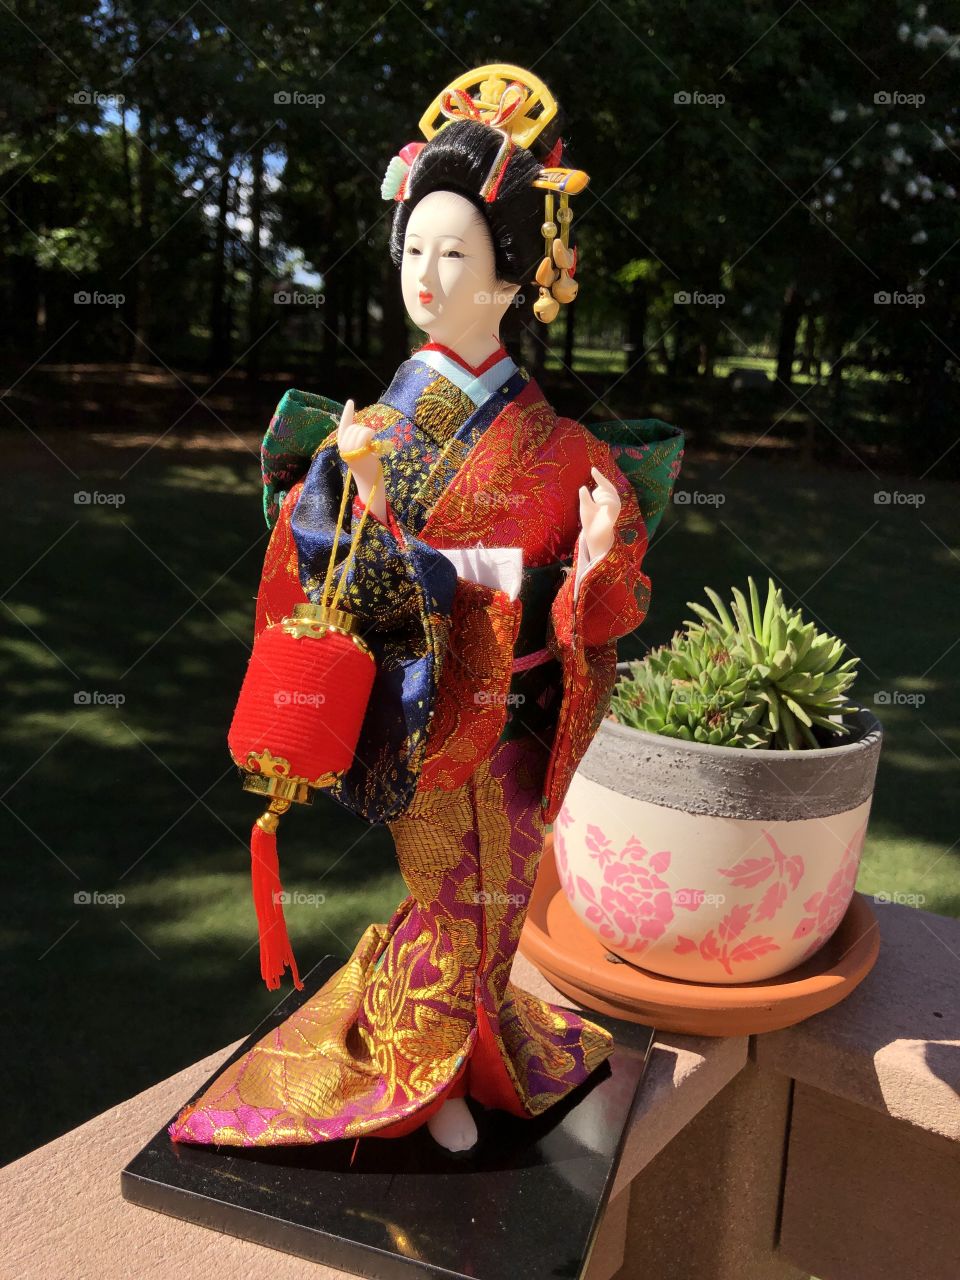 A precious Christmas gift from my mother due to my love of the movie “Memoirs of a Geisha”.  A beautiful Geisha doll in a fashionable colorful silk kimono.  No editing just good photography.